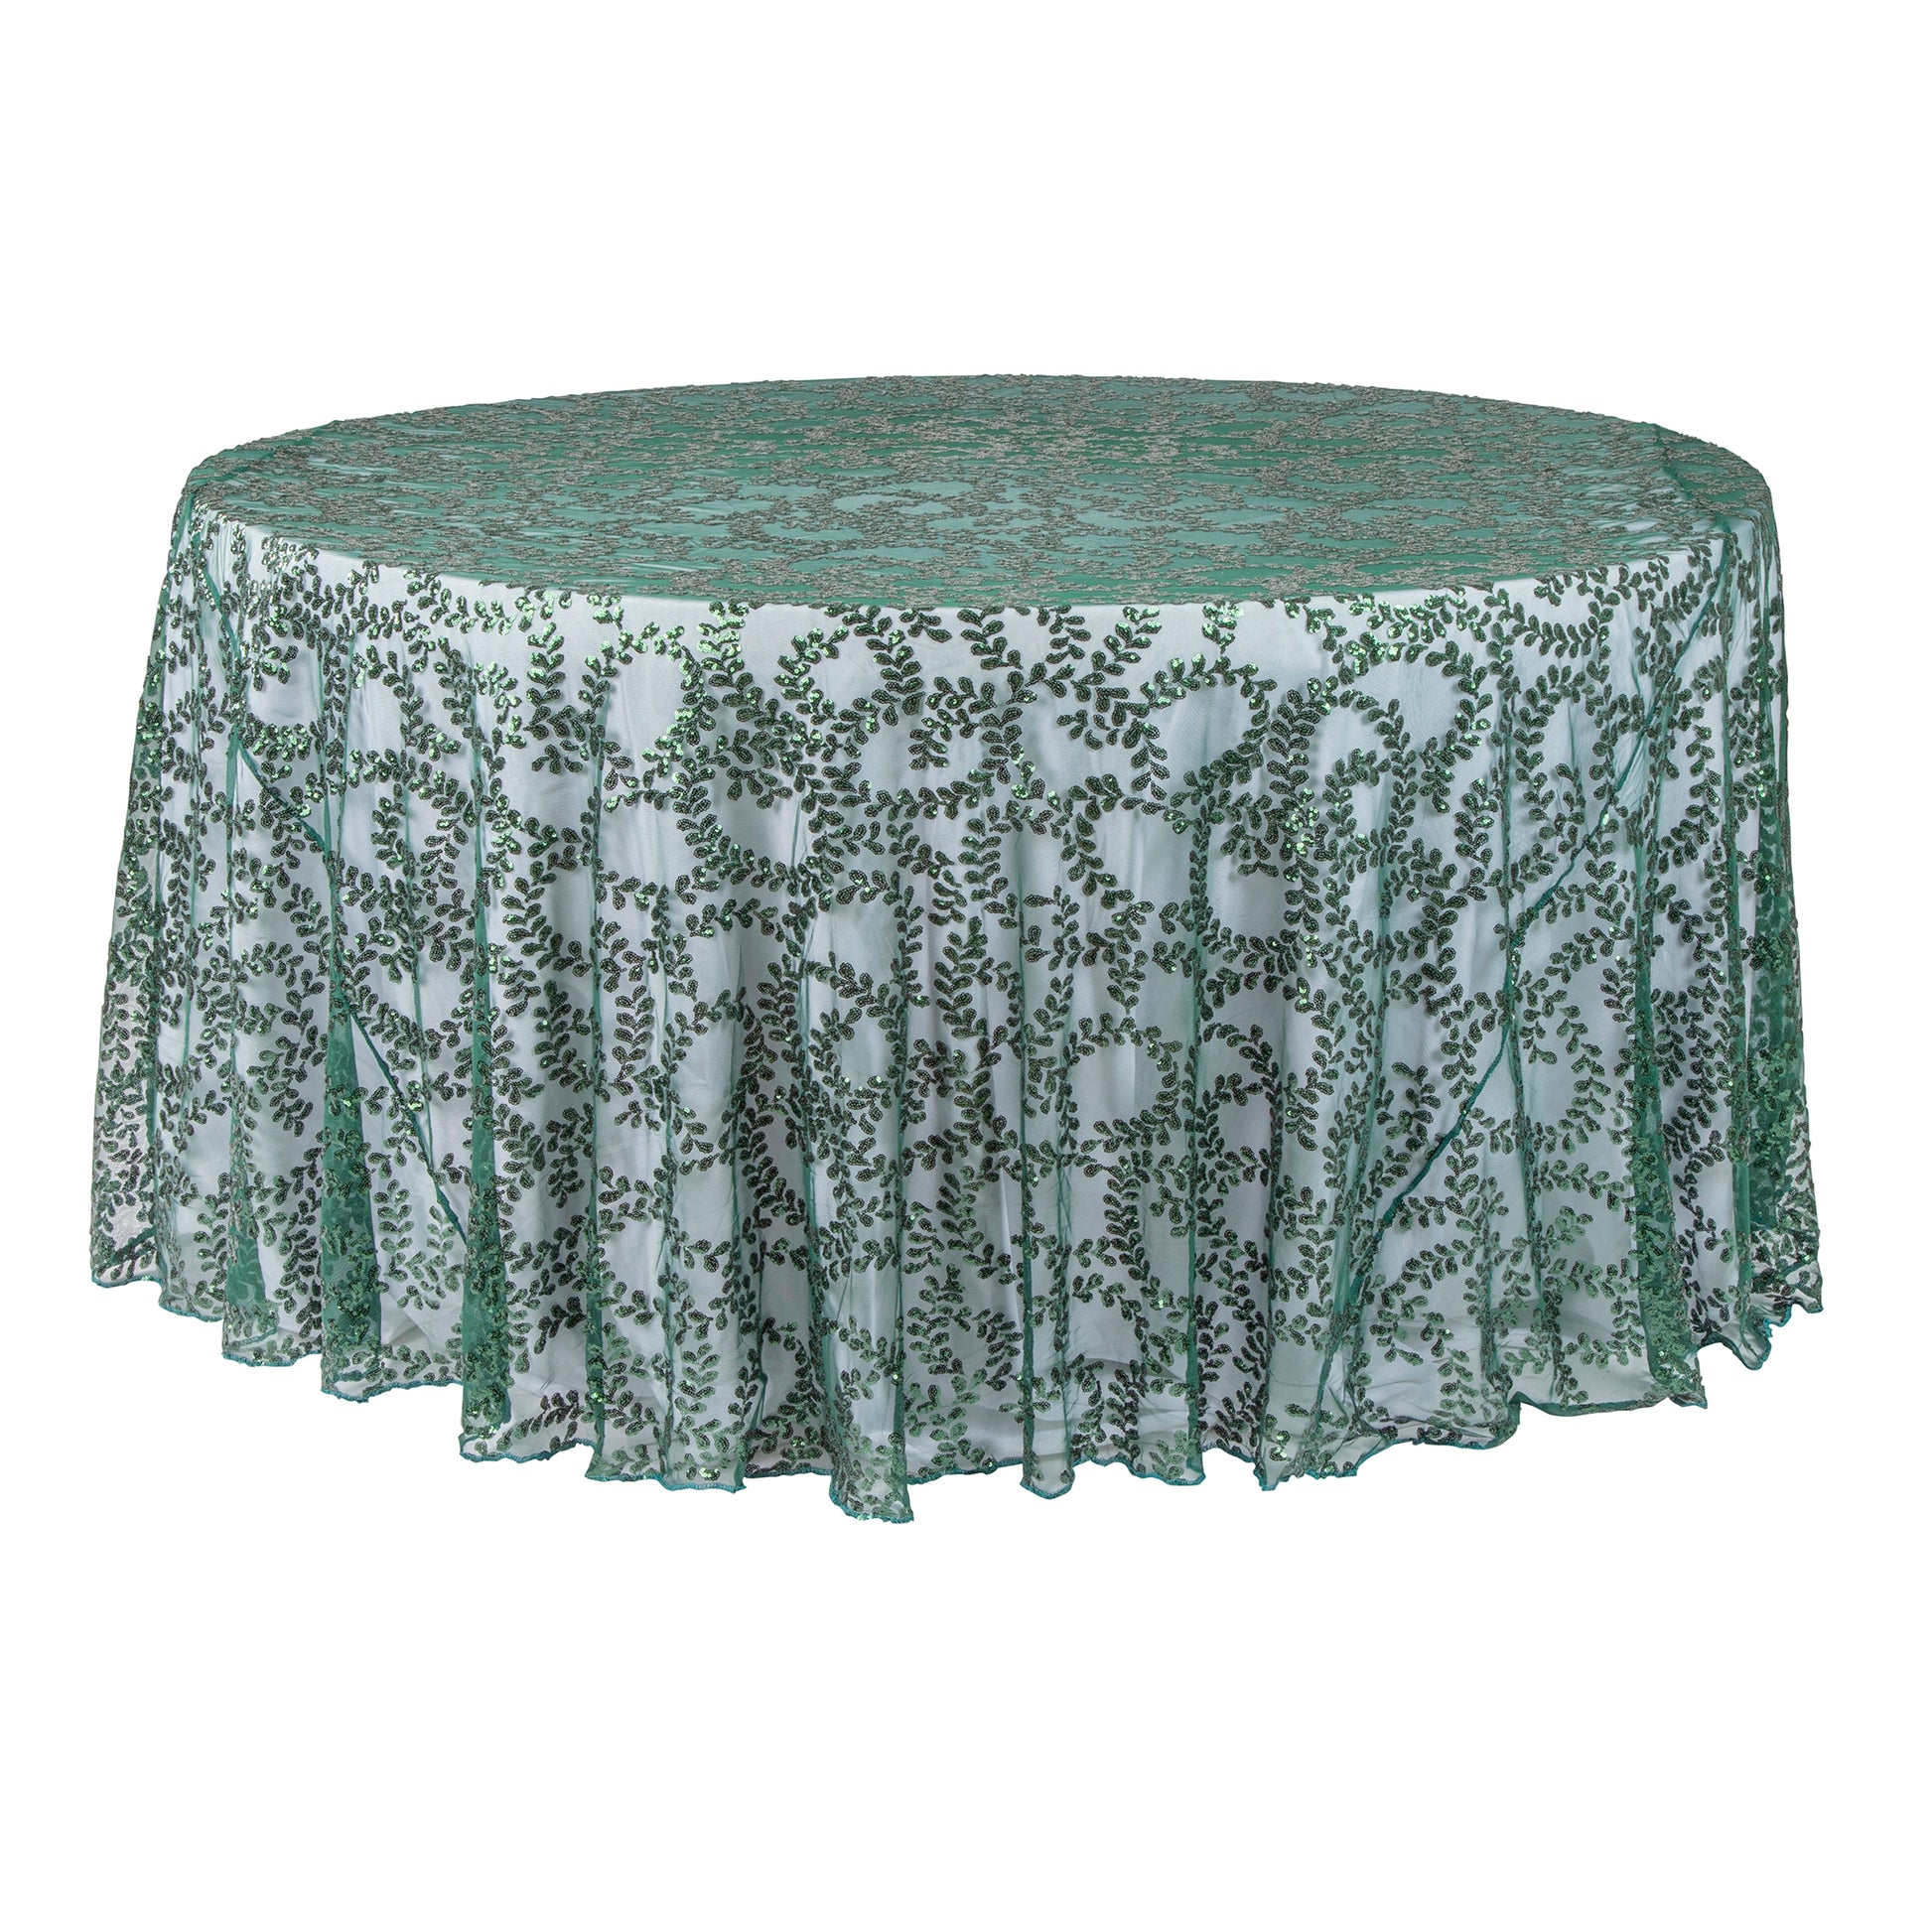 Sequin Vine Tablecloth Overlay 120" Round - Emerald Green